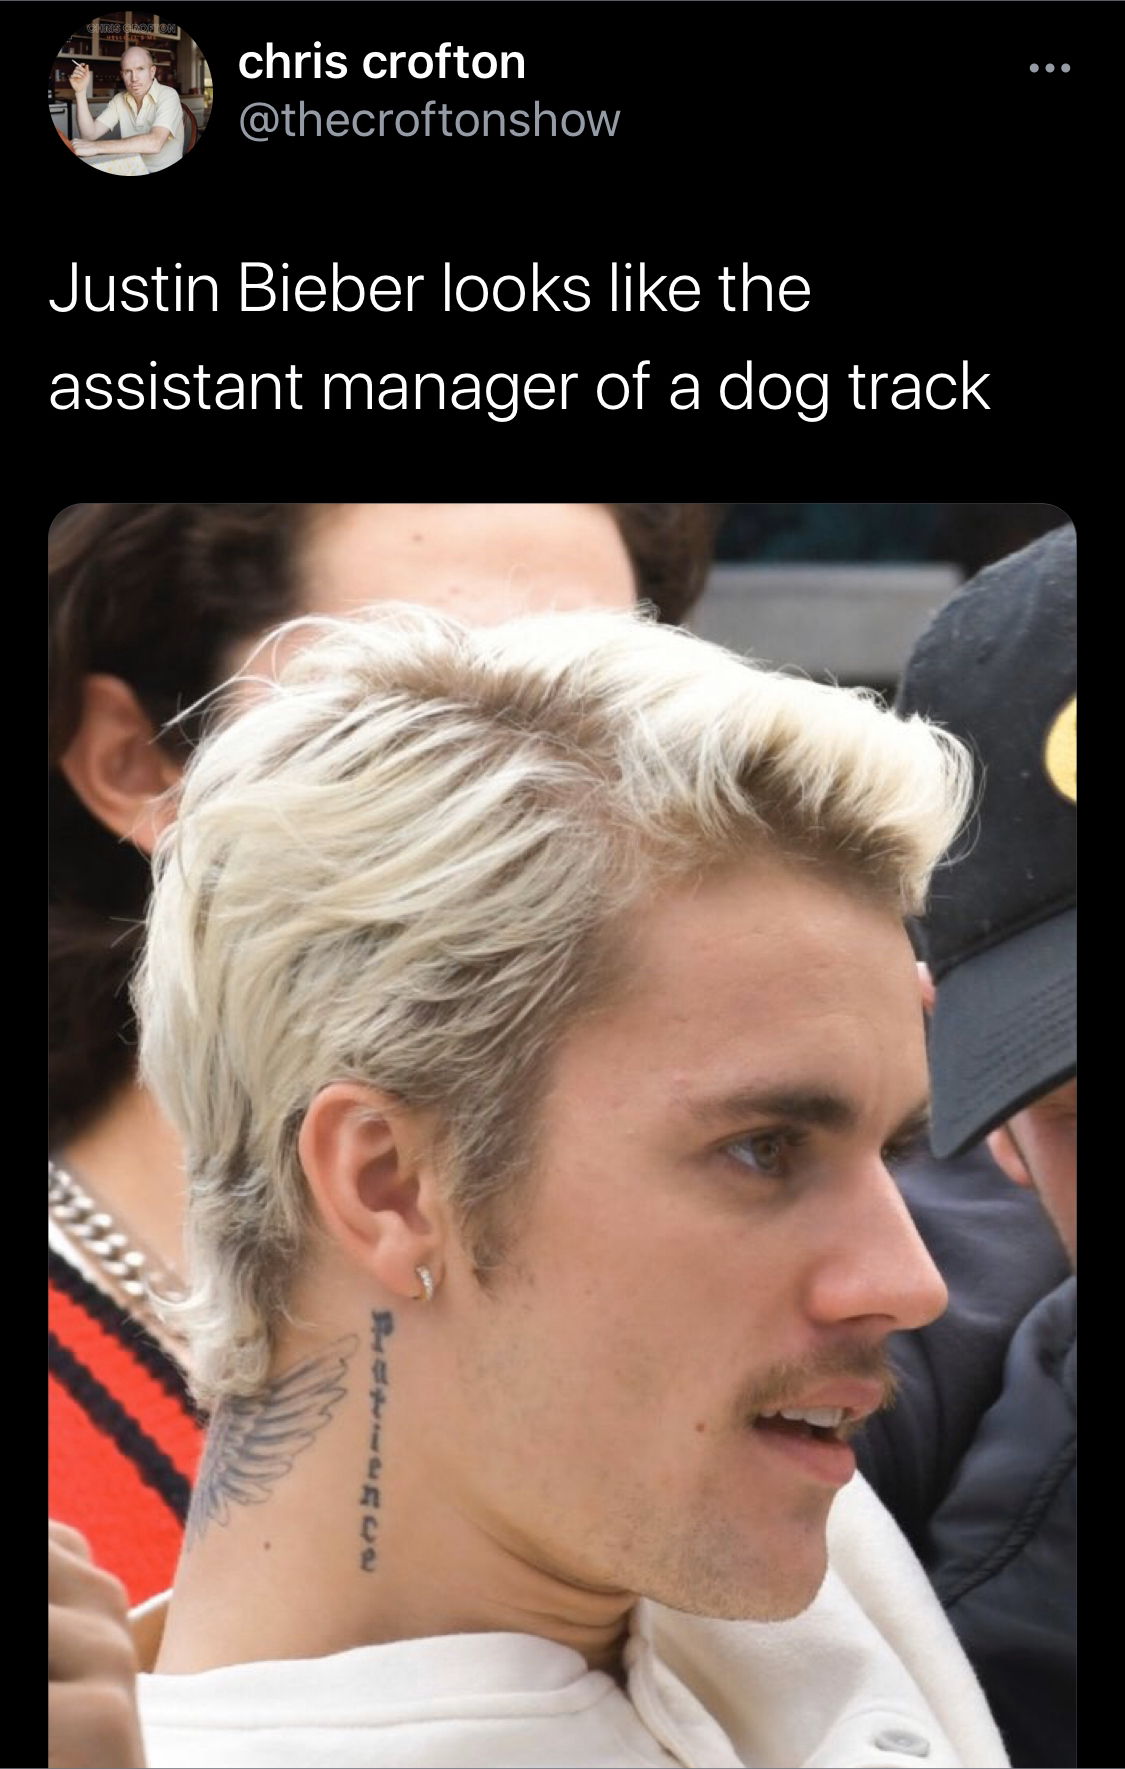 hairstyle - chris crofton Justin Bieber looks the assistant manager of a dog track